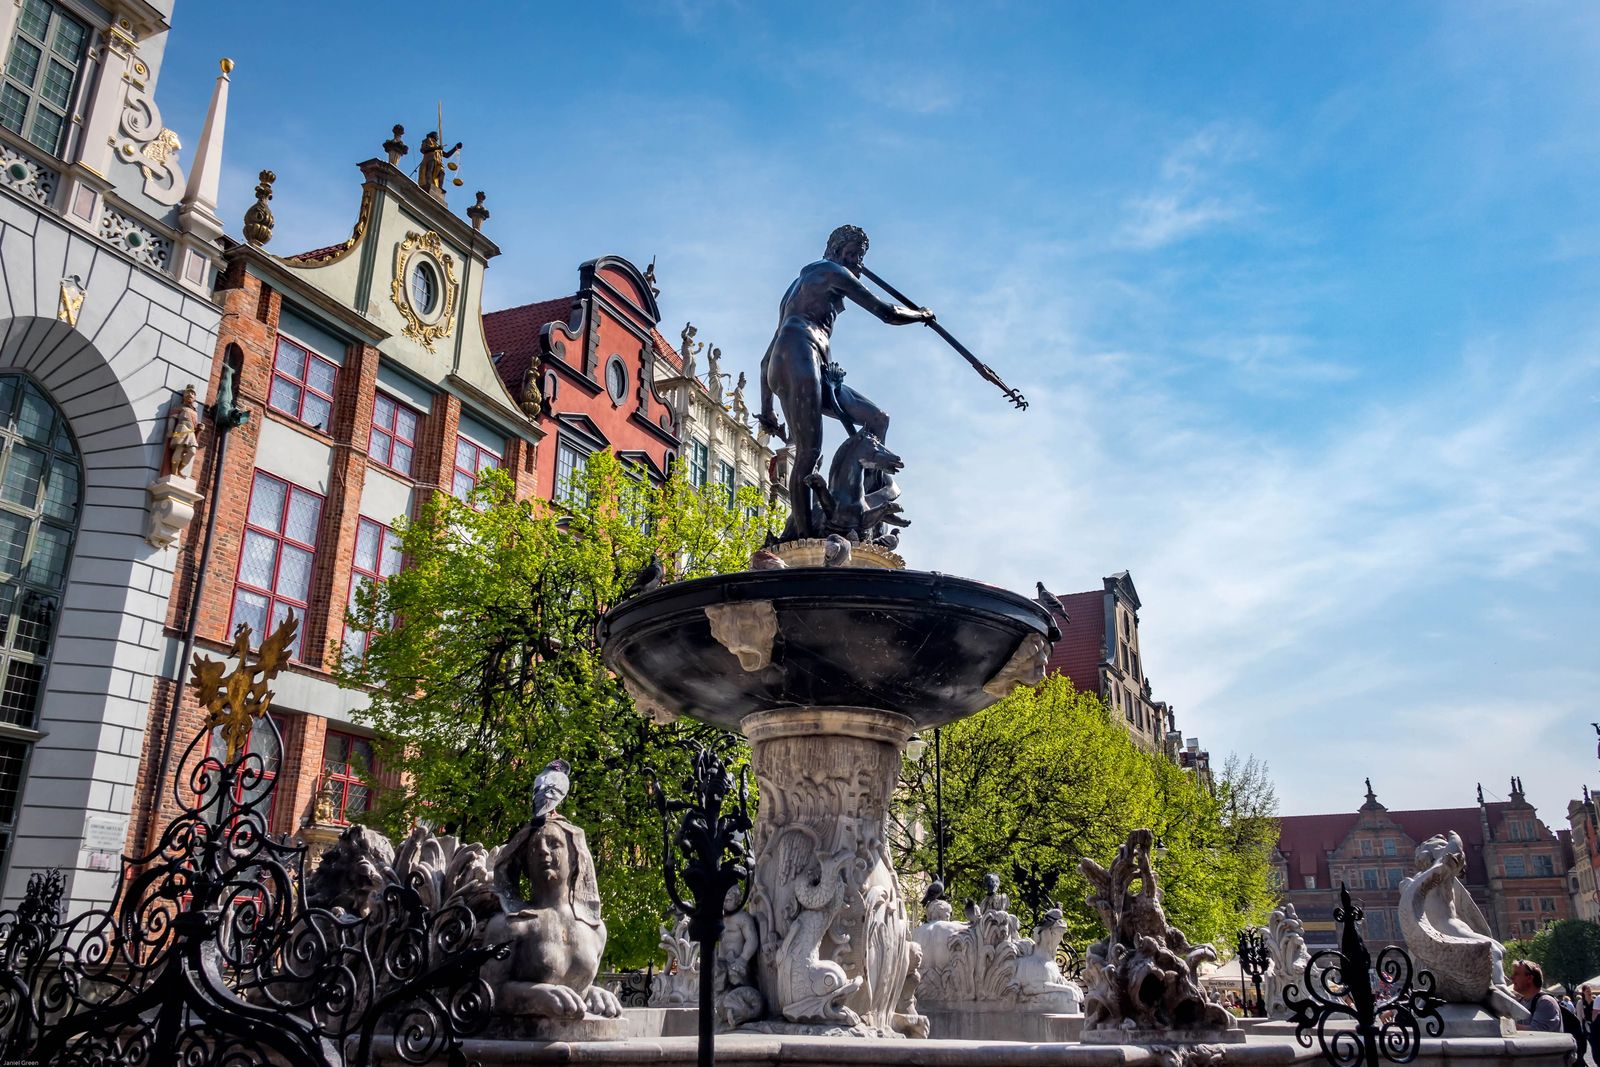 Neptune Fountain in Gdansk, 5 European Cities You Will Fall In Love With